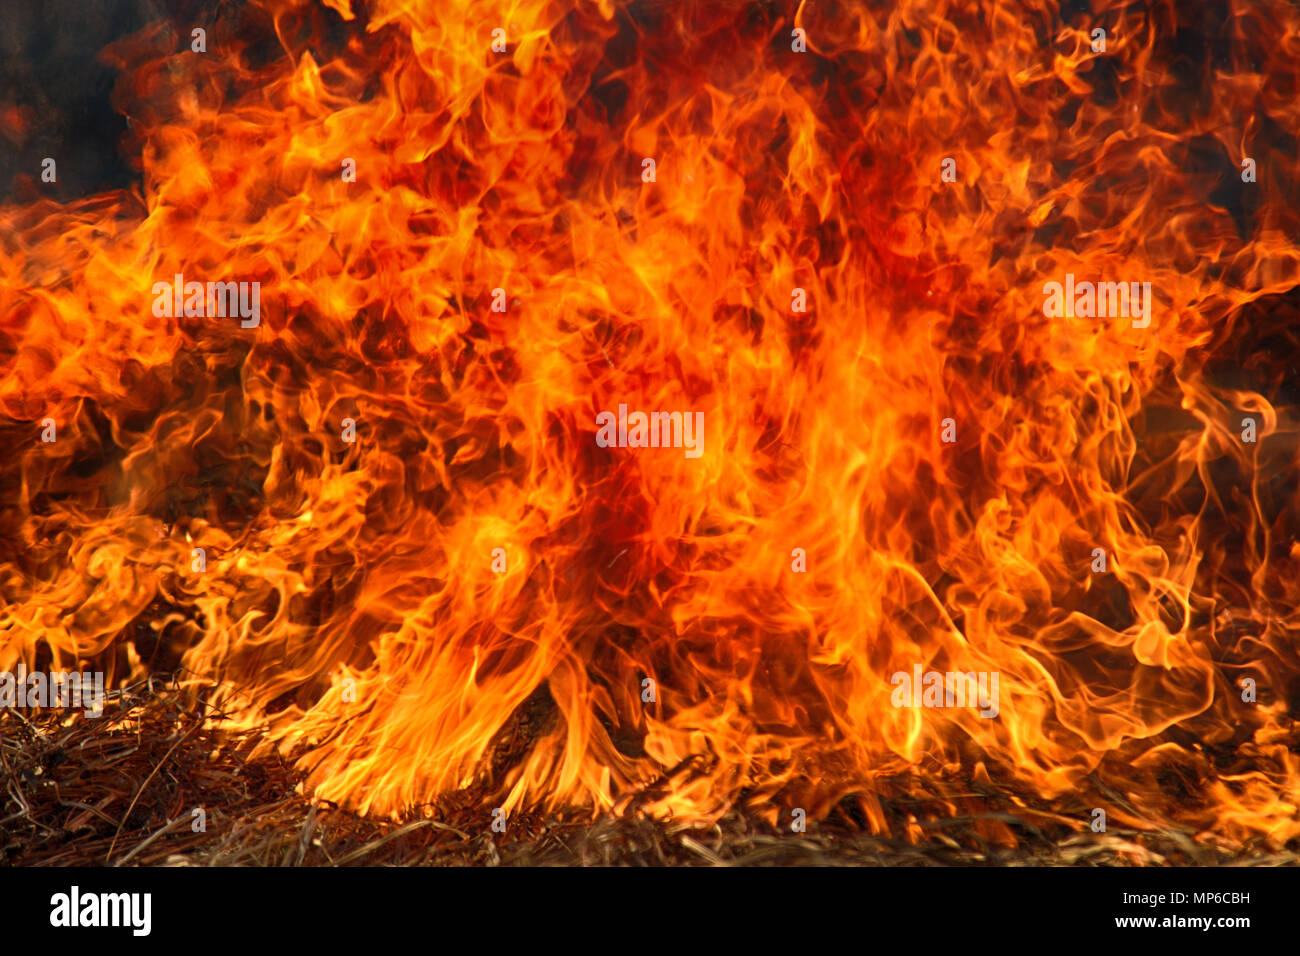 Fire Storm Fire In Shrub Kills Huge Number Small Animals Tongues Of Fire Wall Of Fire Like Wall Of Red Bushes Stock Photo Alamy